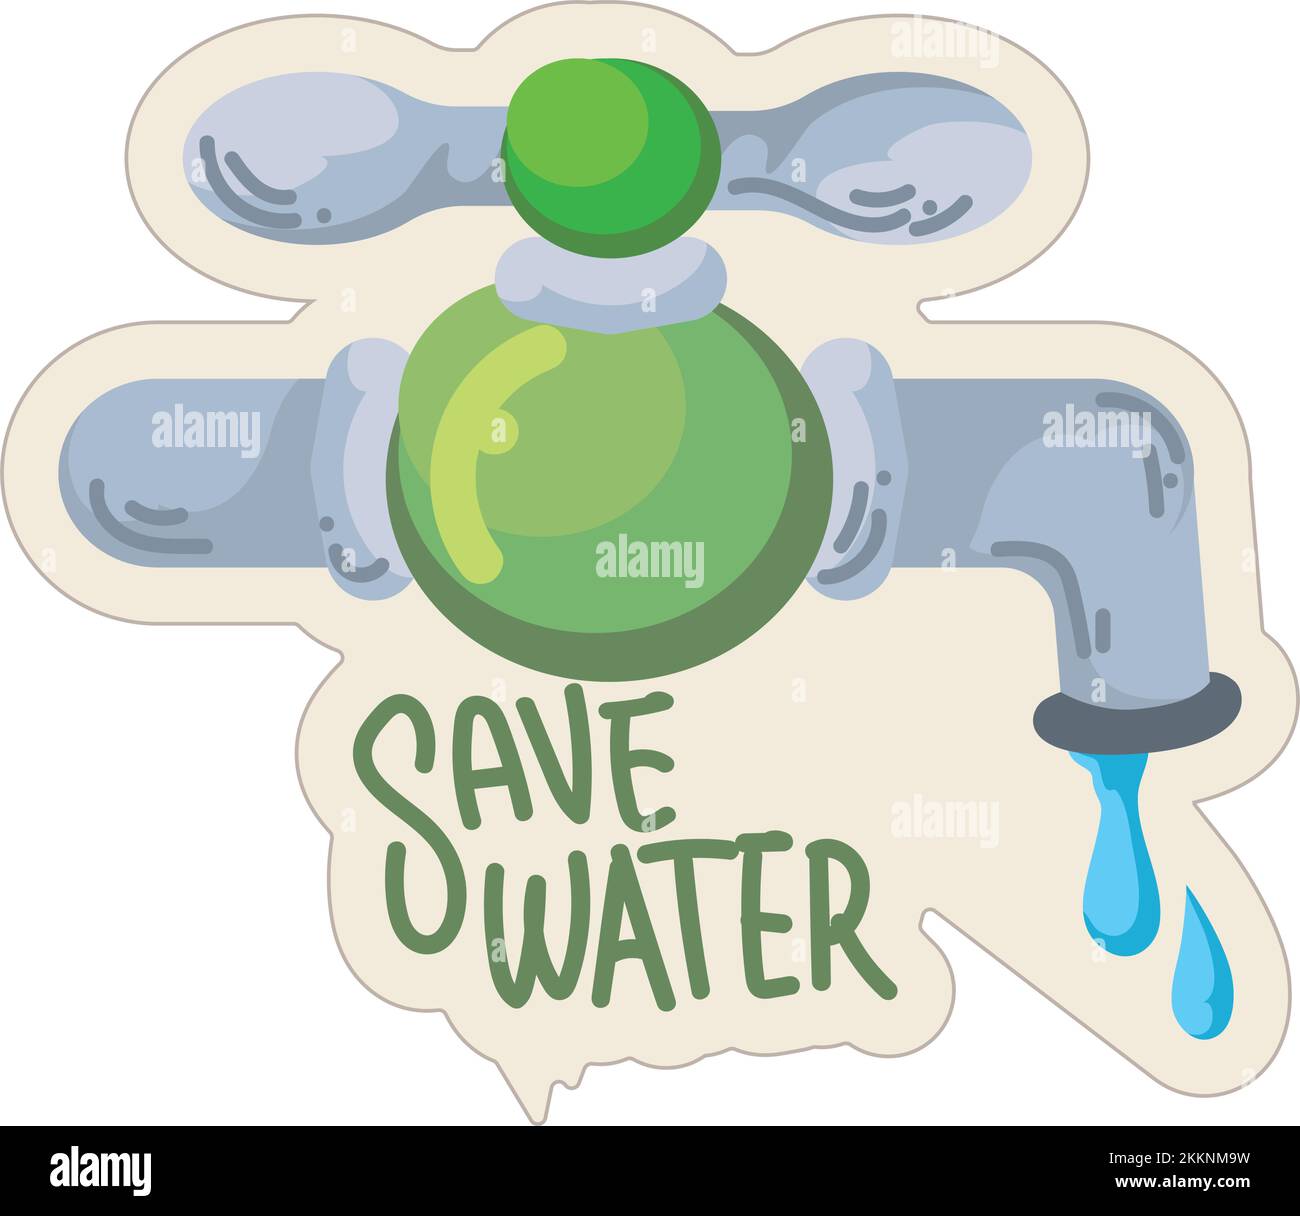 save water badge Stock Vector